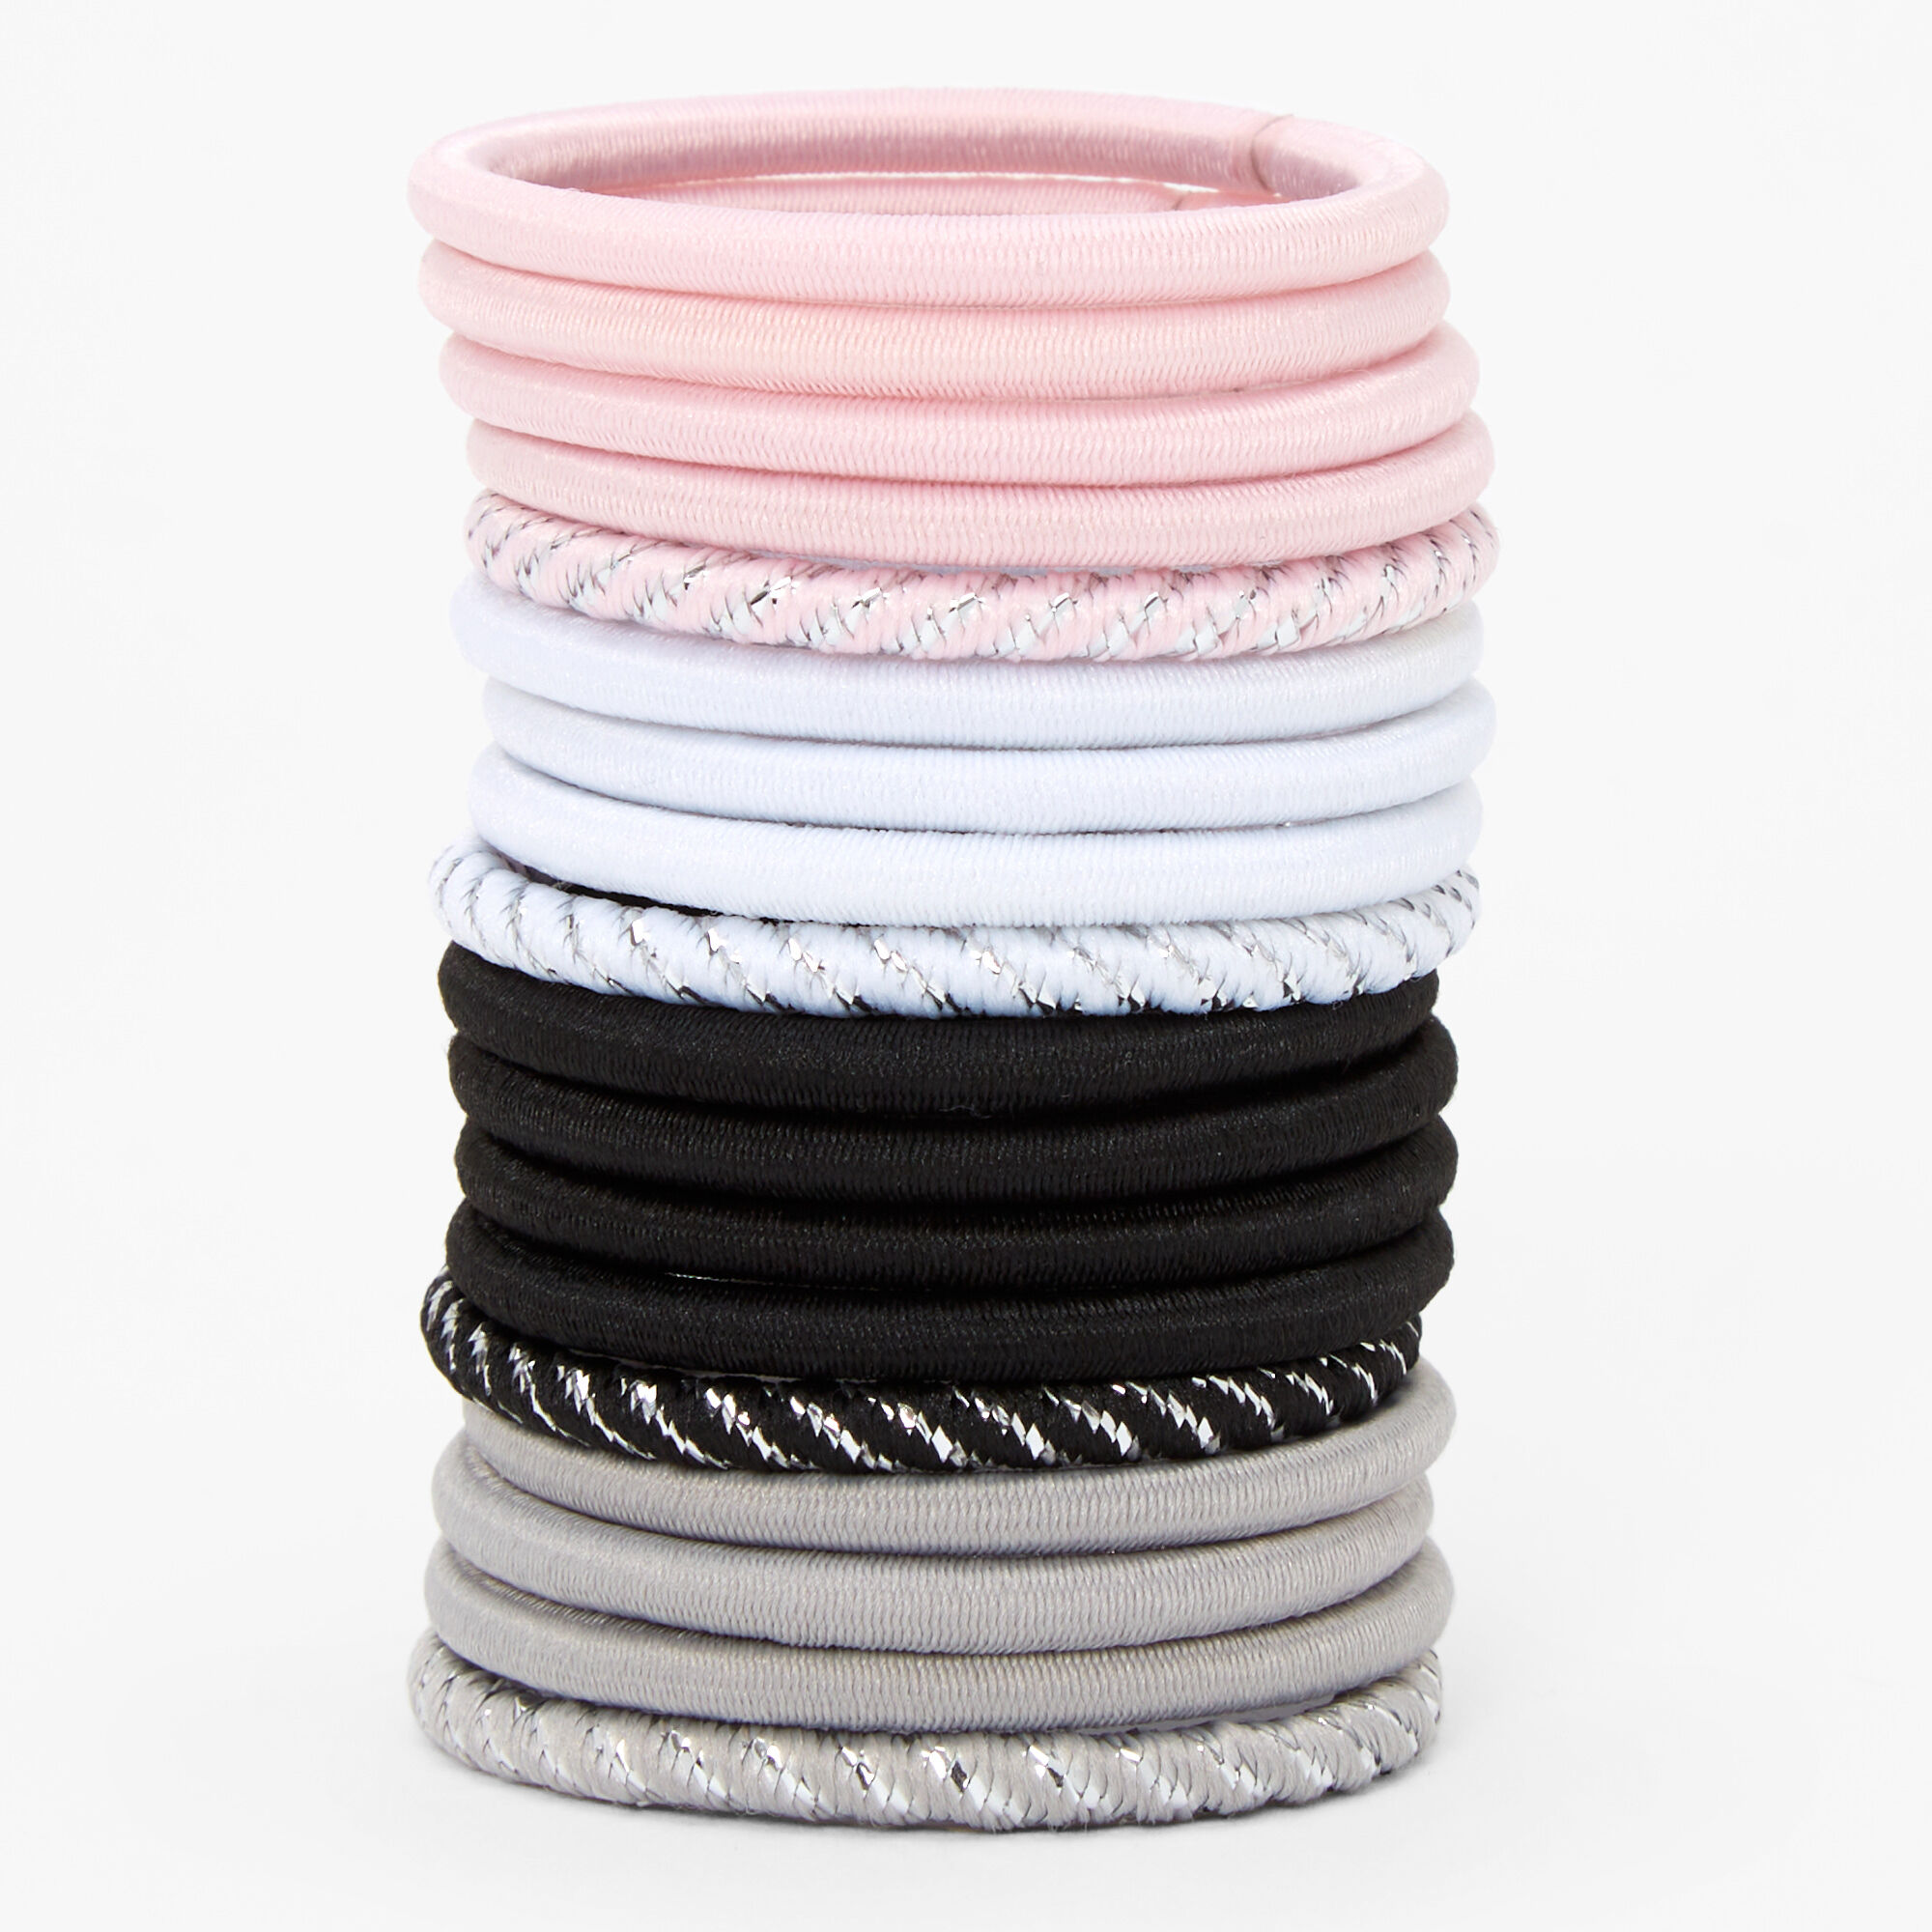 View Claires Club Edgy Lurex Hair Ties 18 Pack information